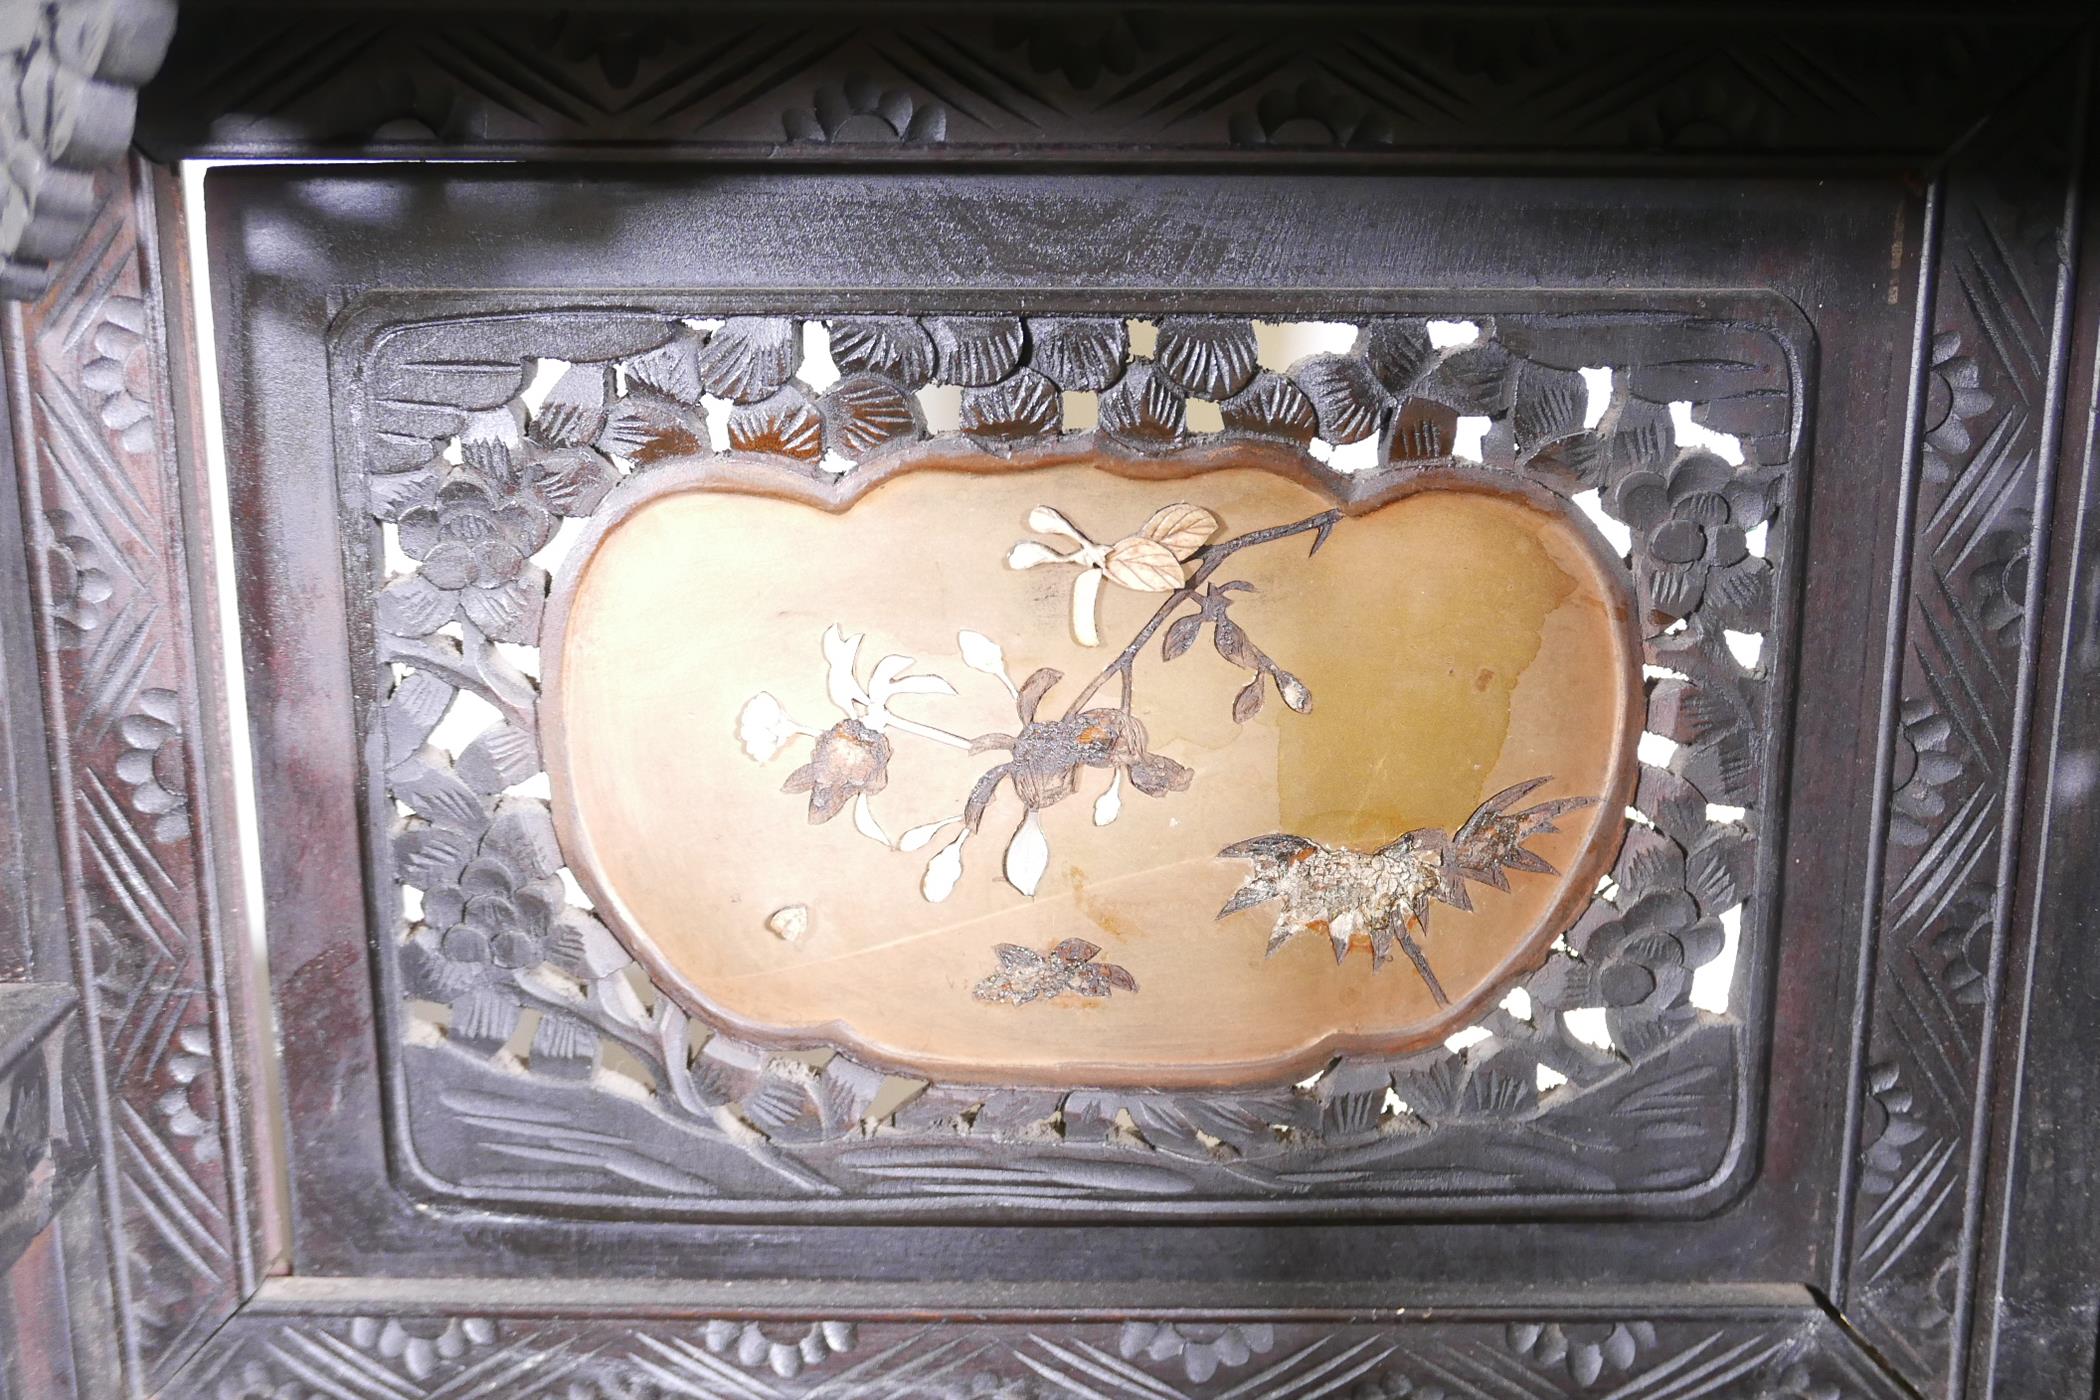 A Japanese Meiji period (1868-1912) two section shodhana, with carved decoration and inlaid - Image 4 of 8